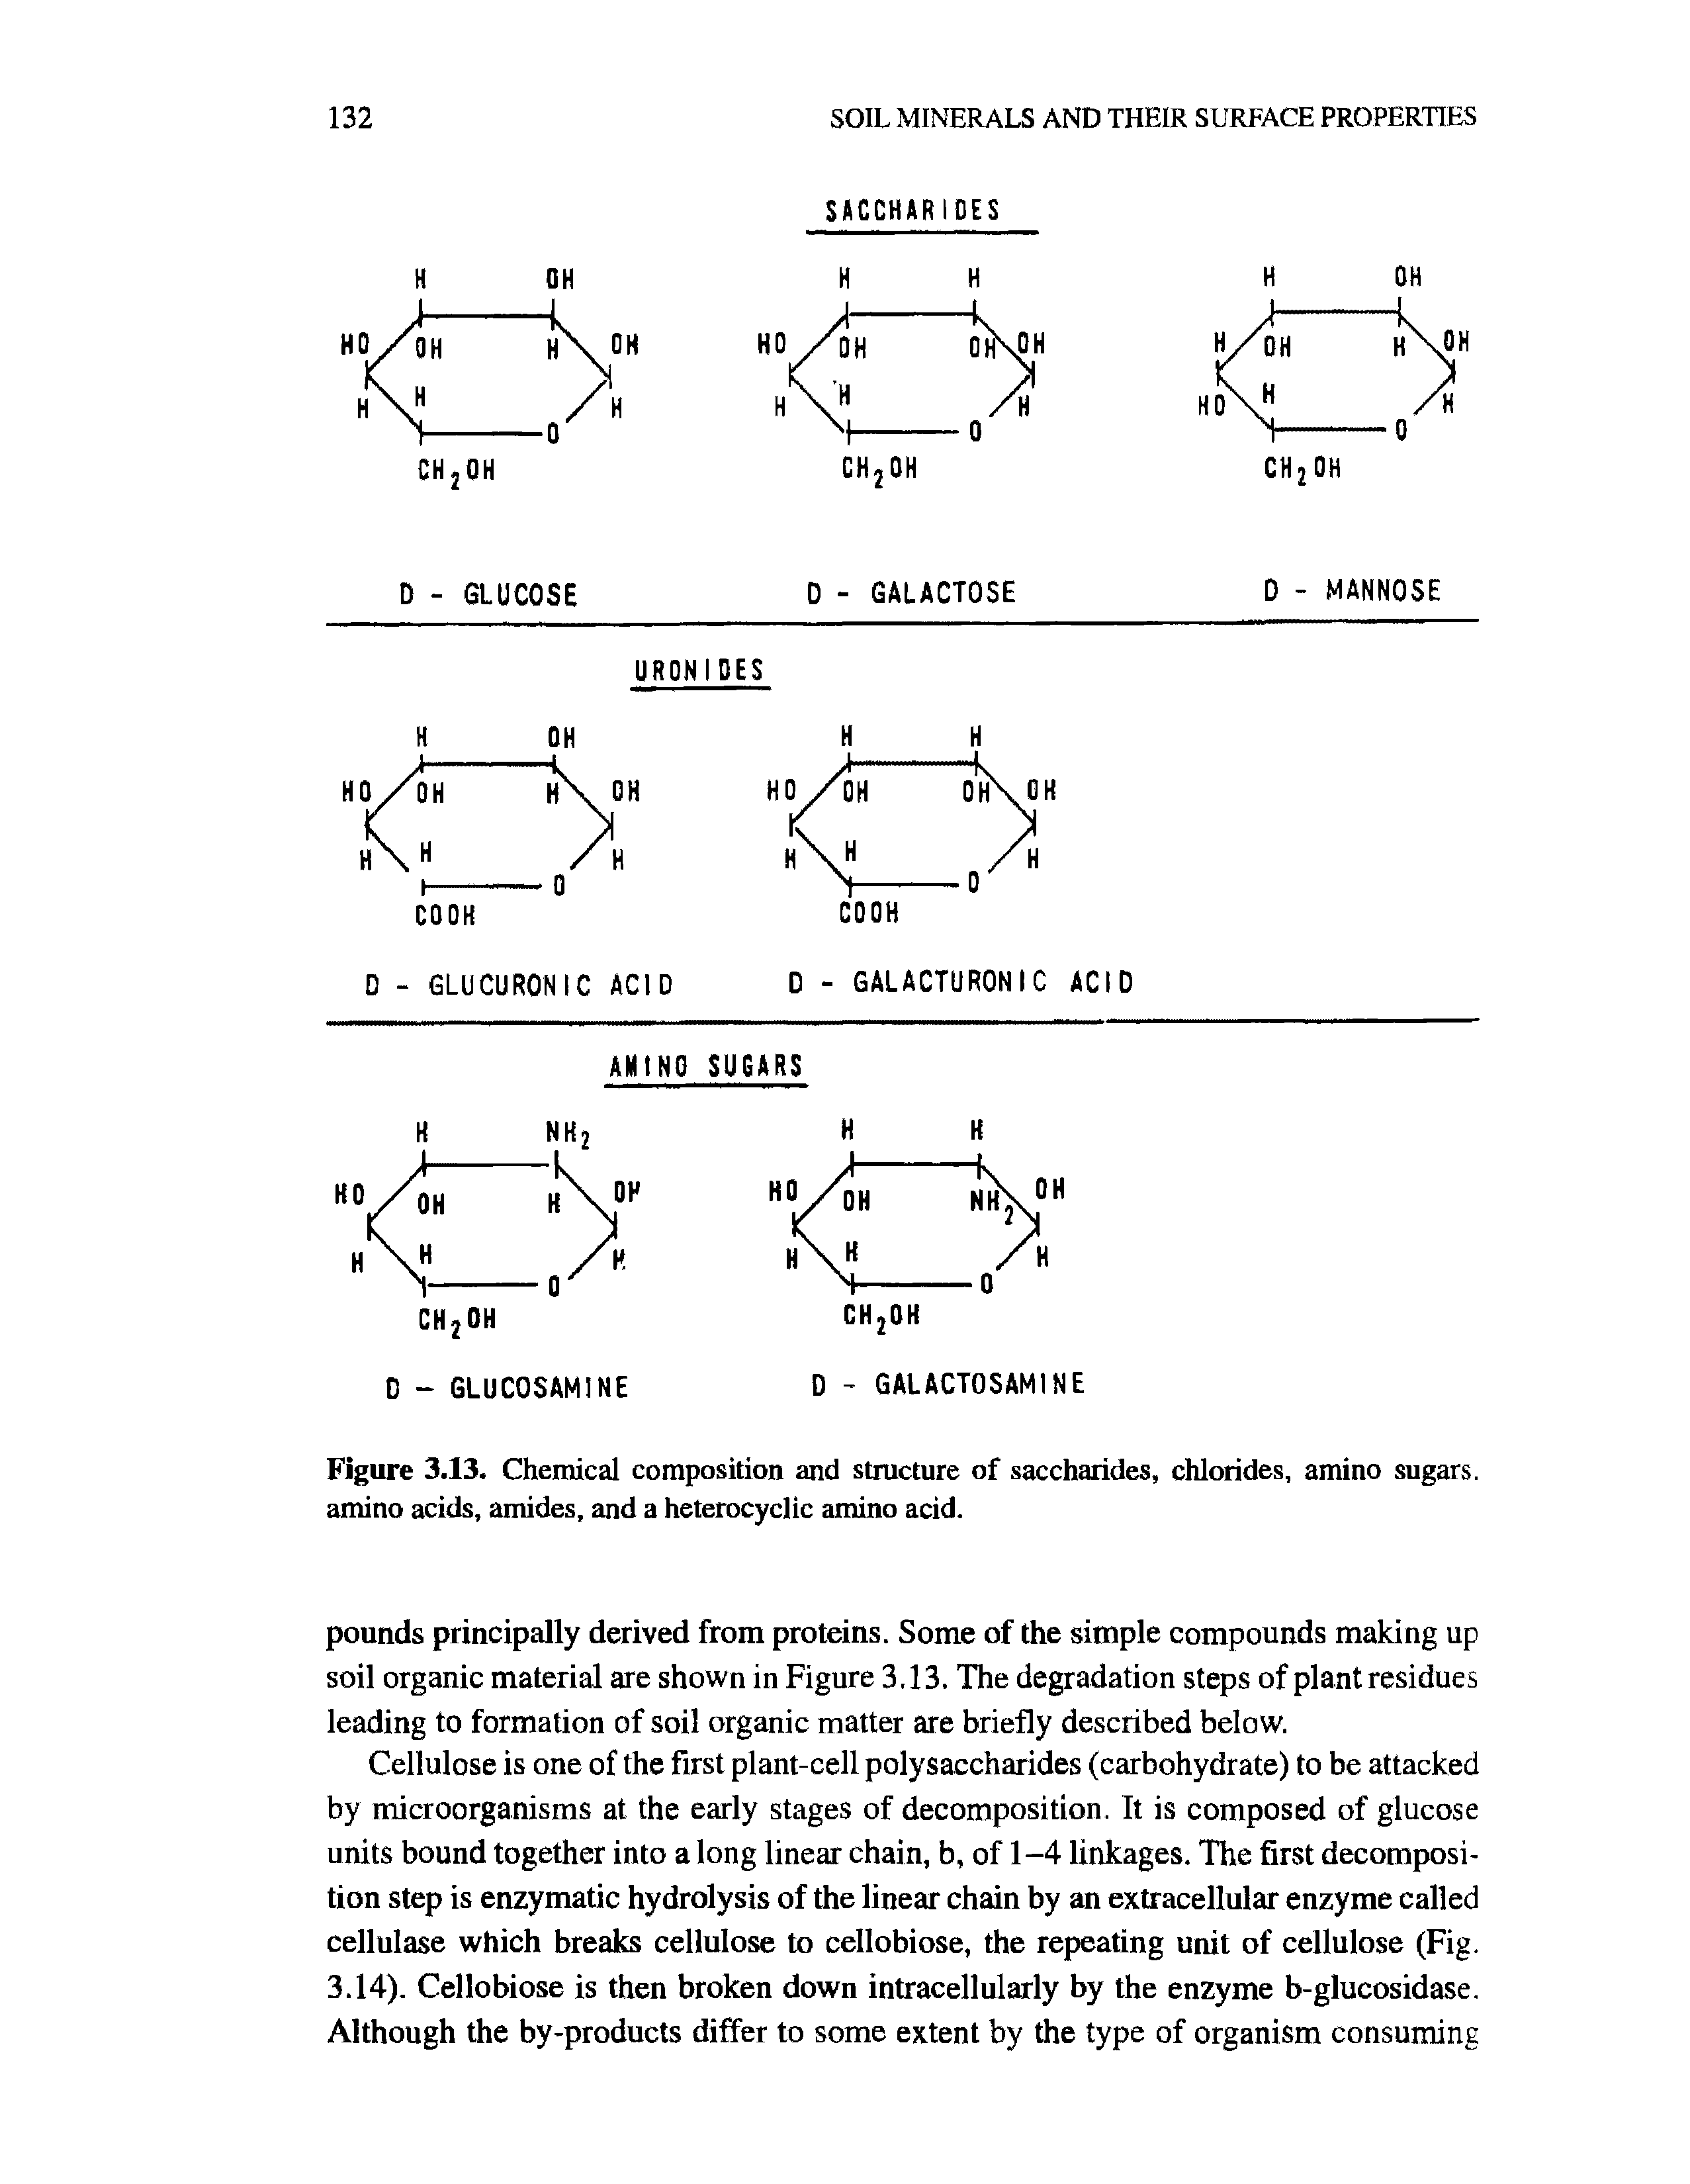 Figure 3.13. Chemical composition and structure of saccharides, chlorides, amino sugars, amino acids, amides, and a heterocyclic amino acid.